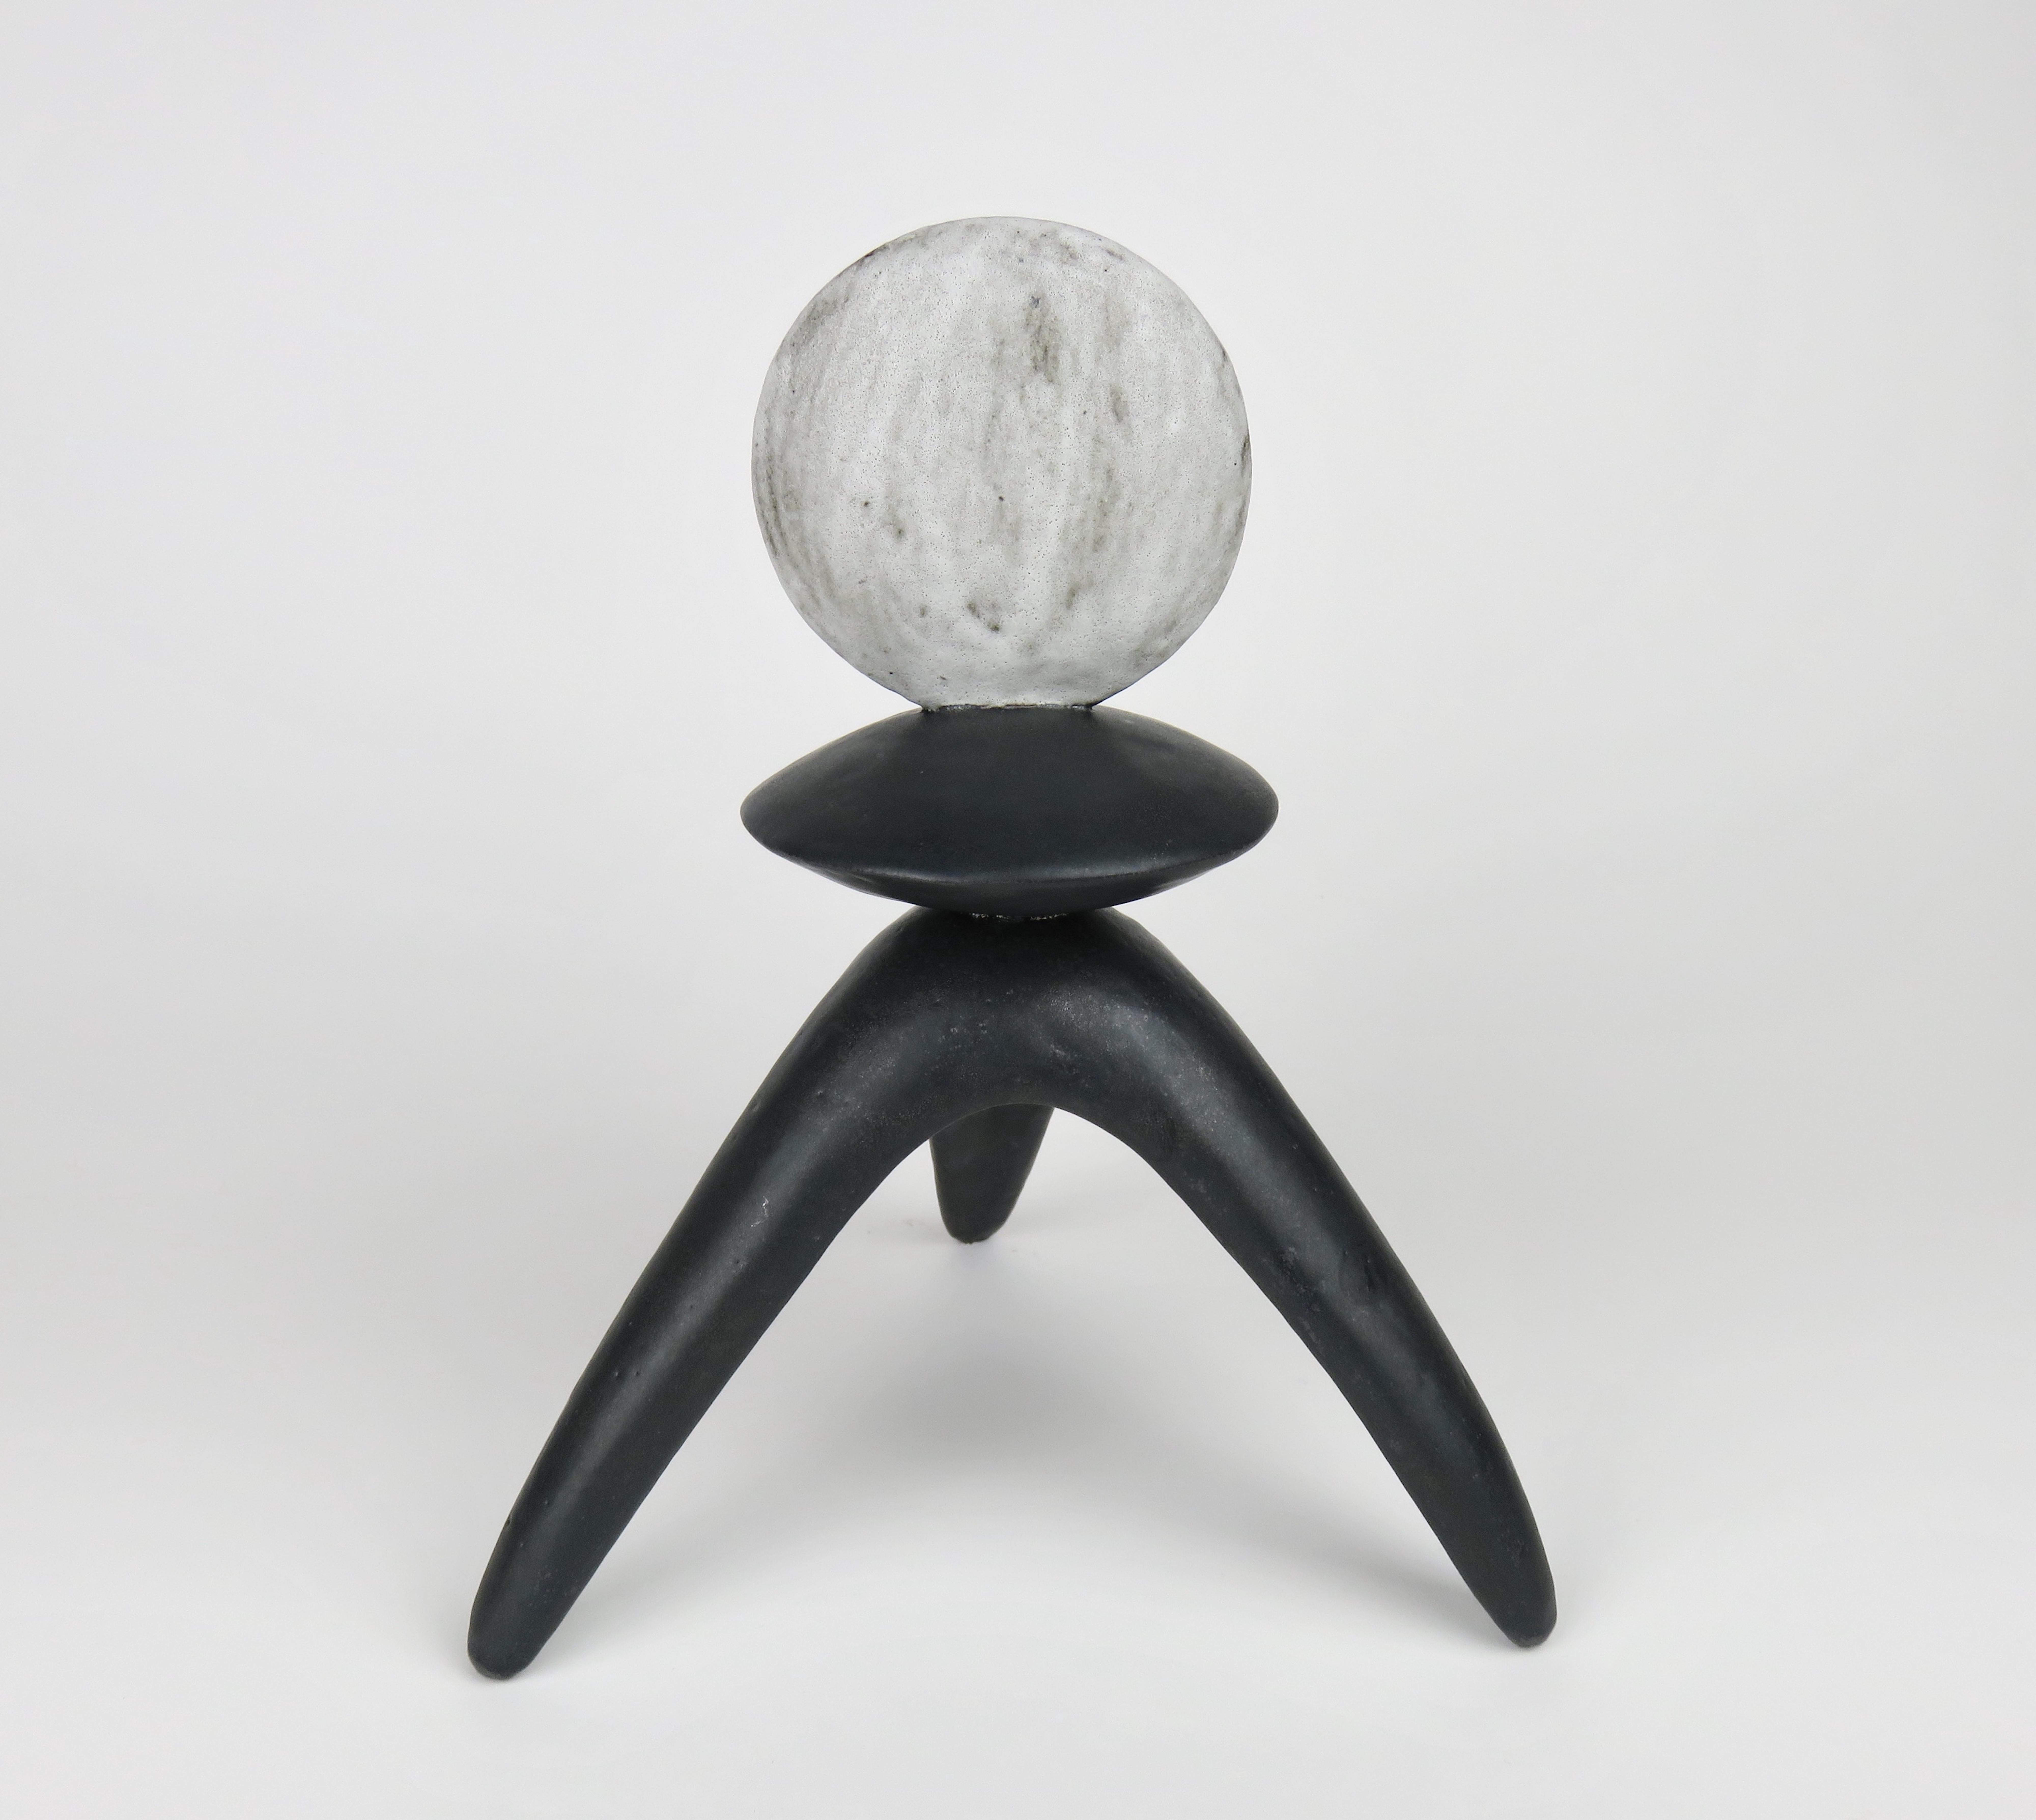 Glazed Moon Phase Totems, White on Black Legs, Hand Built Ceramic by Helena Starcevic For Sale